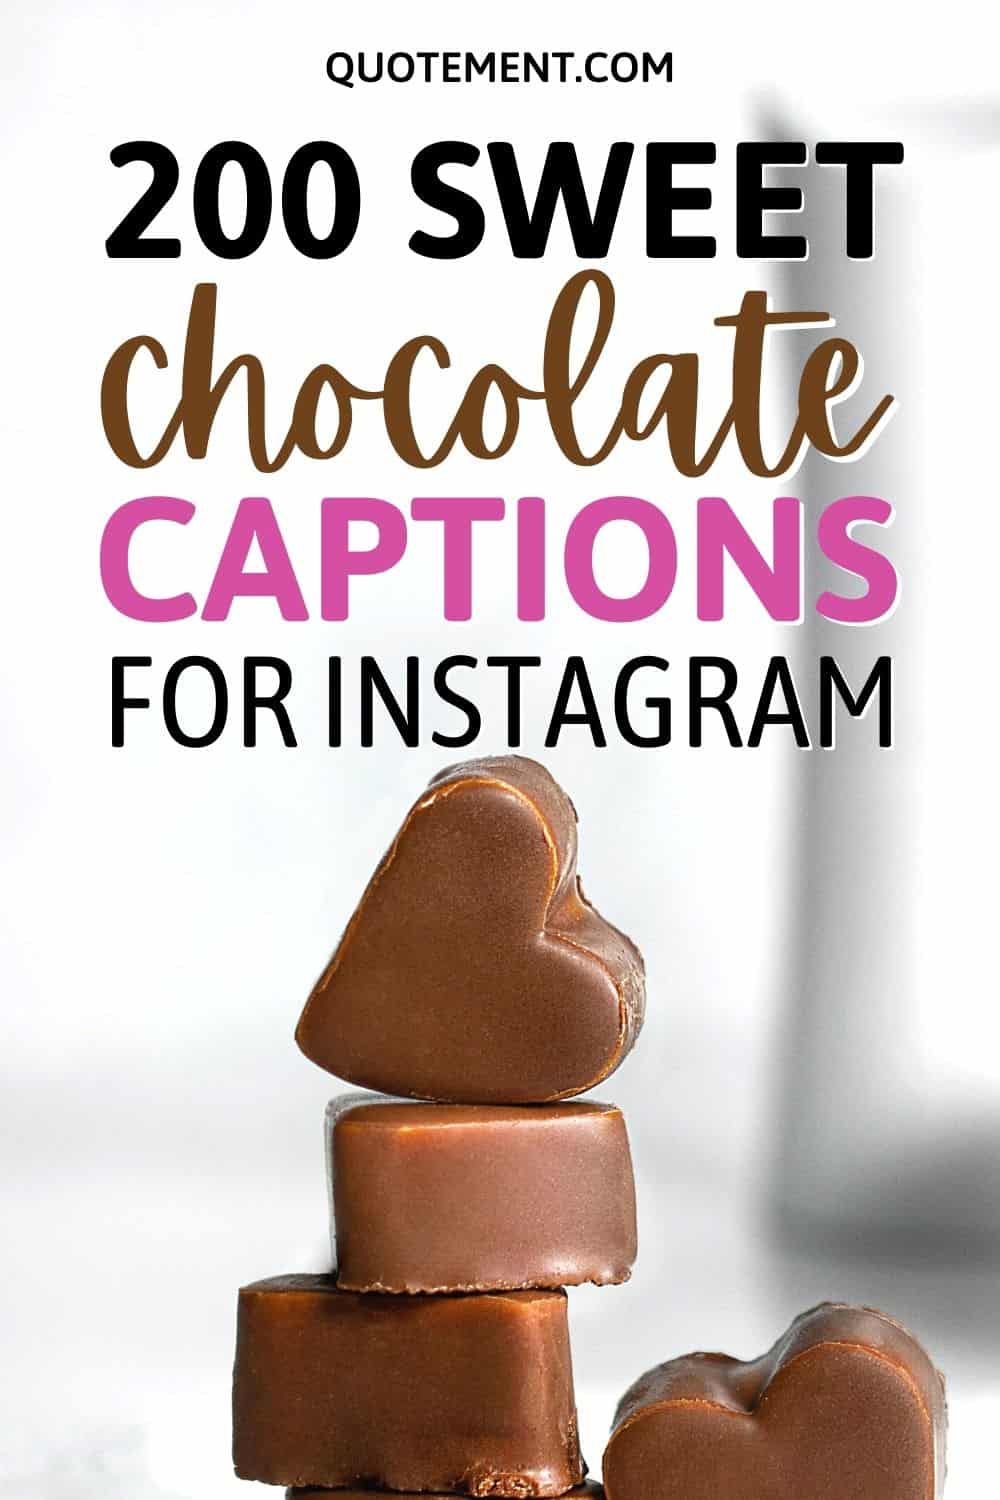 200 Sweet Chocolate Captions For Instagram You’ll Love